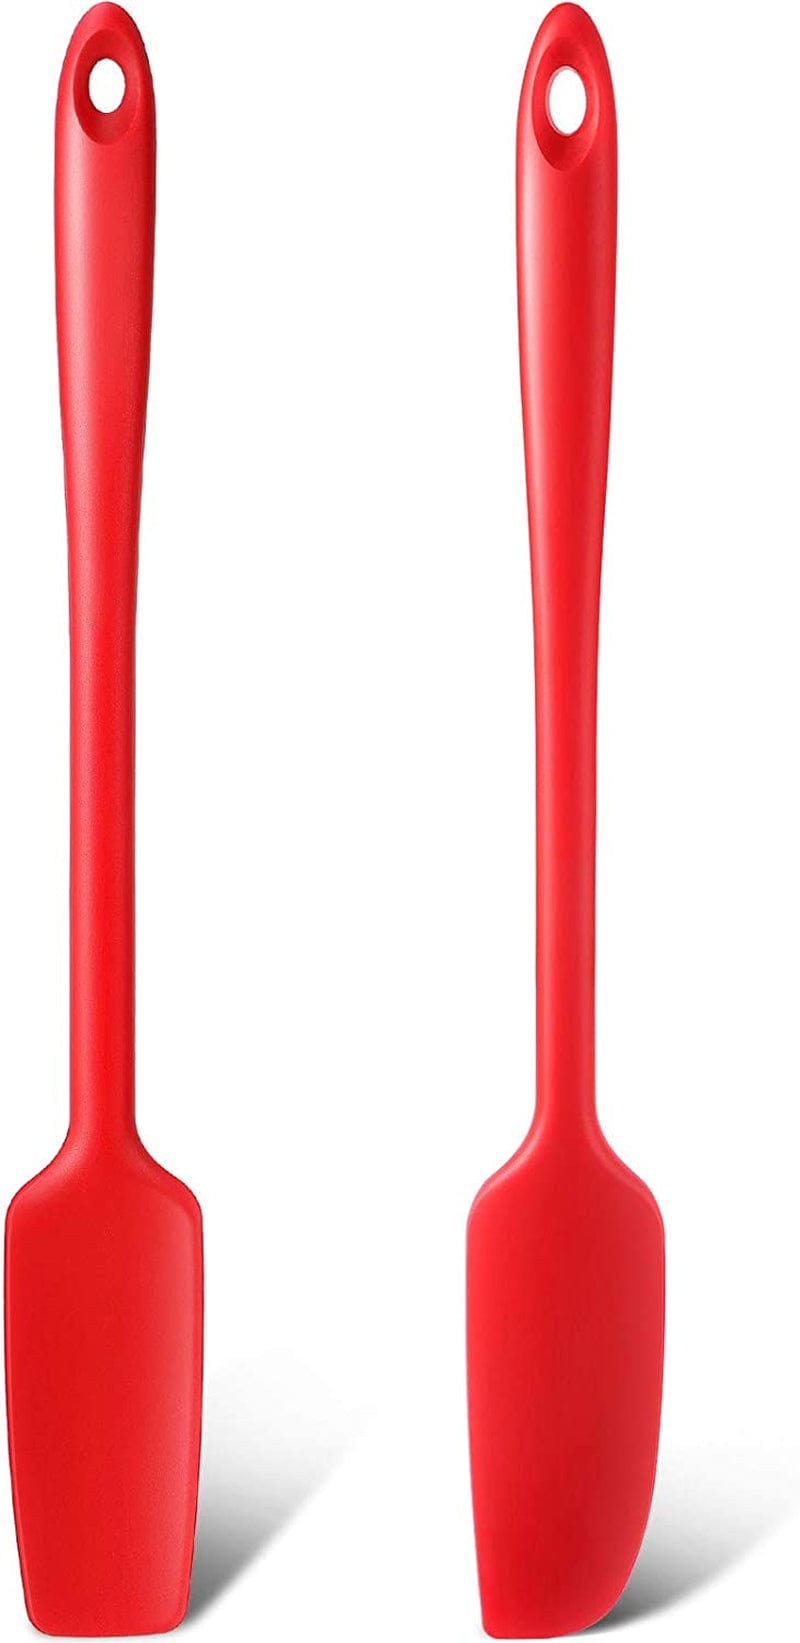 2 Pieces Long Handle Silicone Jar Spatula Non-Stick Rubber Scraper Heat Resistant Spatula Silicone Scraper for Jars, Smoothies, Blenders Cooking Baking Stirring Mixing Tools (Red)